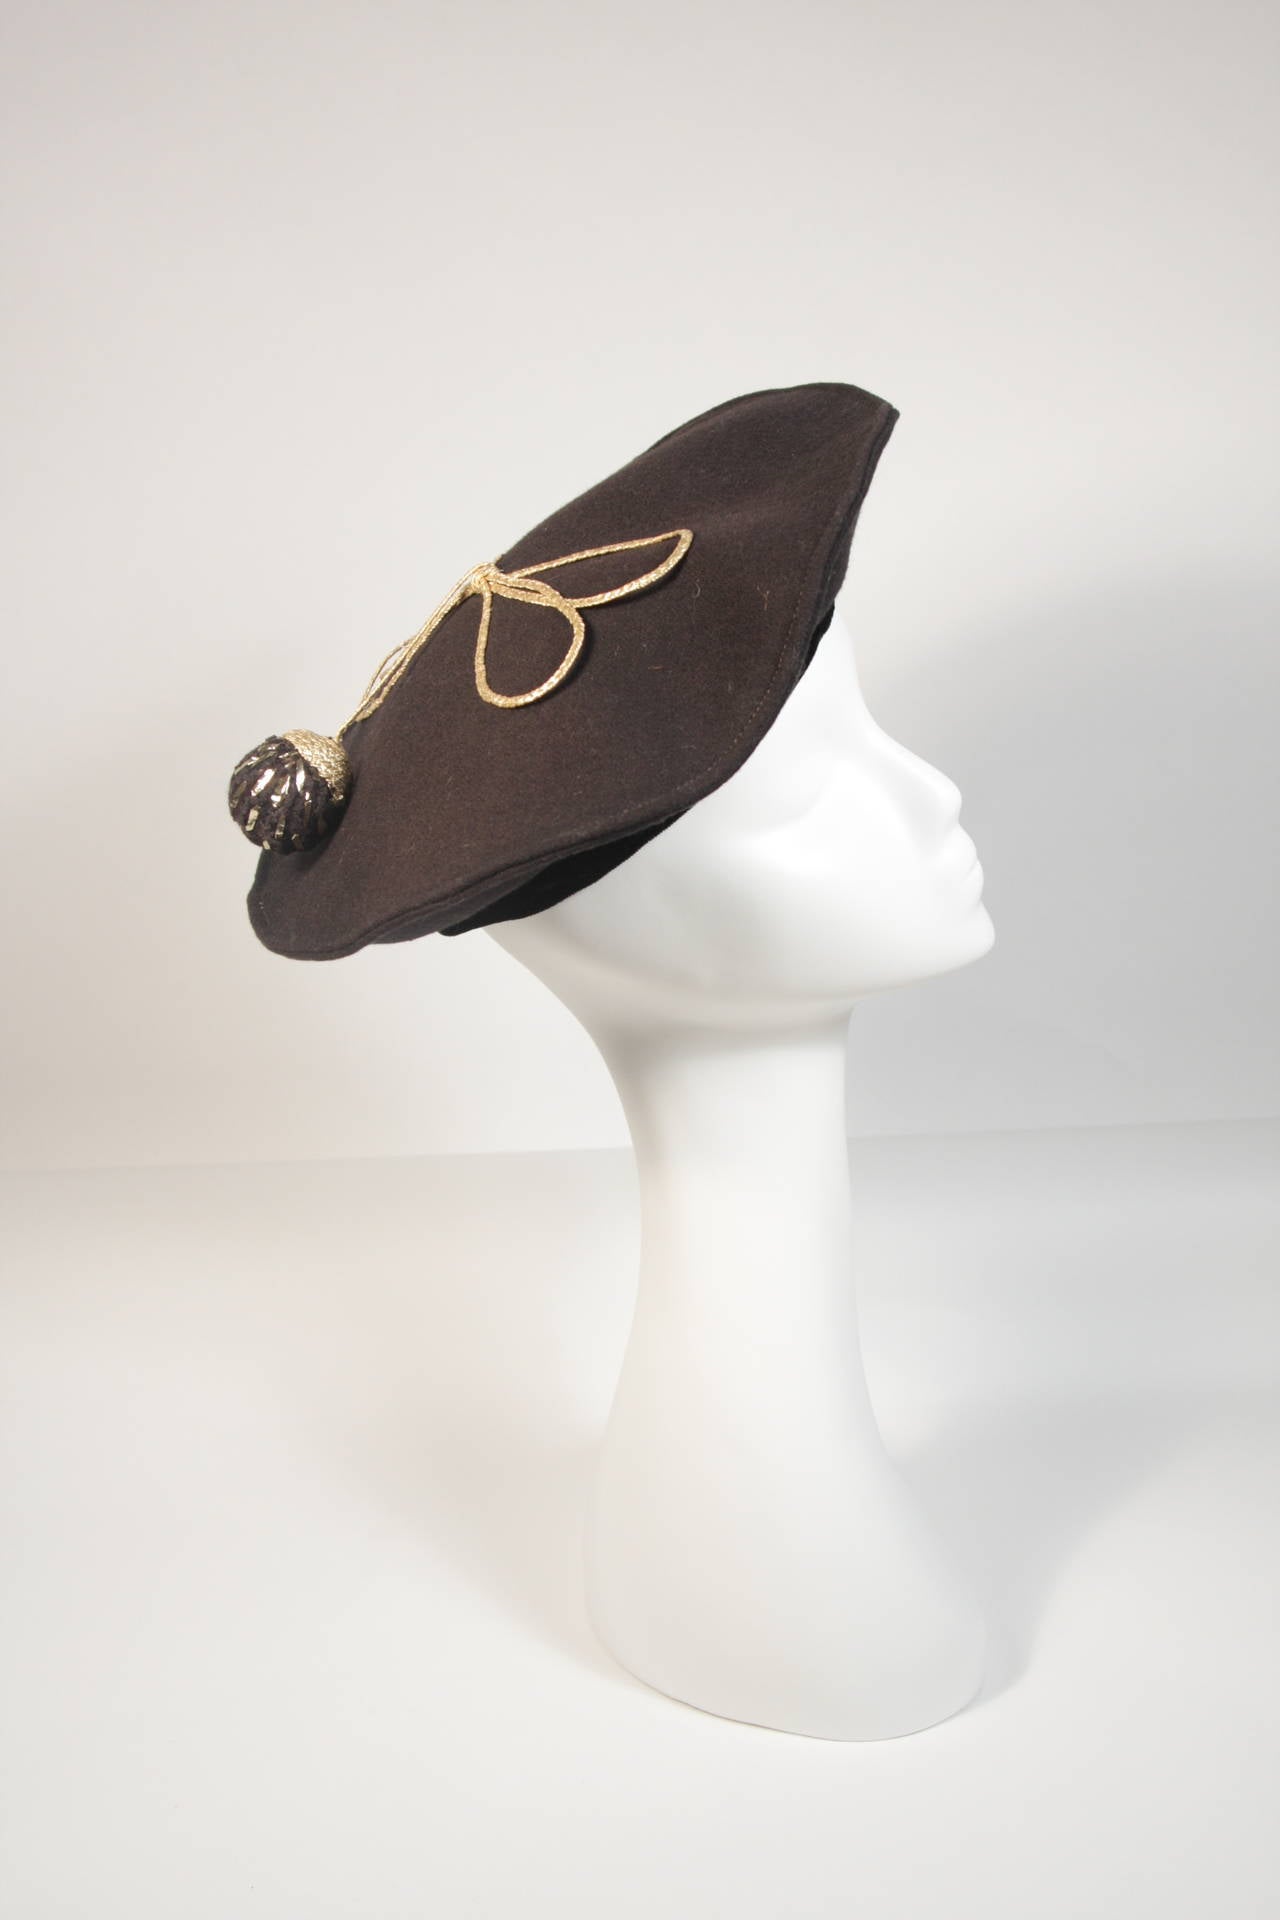 Yves Saint Laurent Rive Gauche Black Beret with Knit Ball In Excellent Condition For Sale In Los Angeles, CA